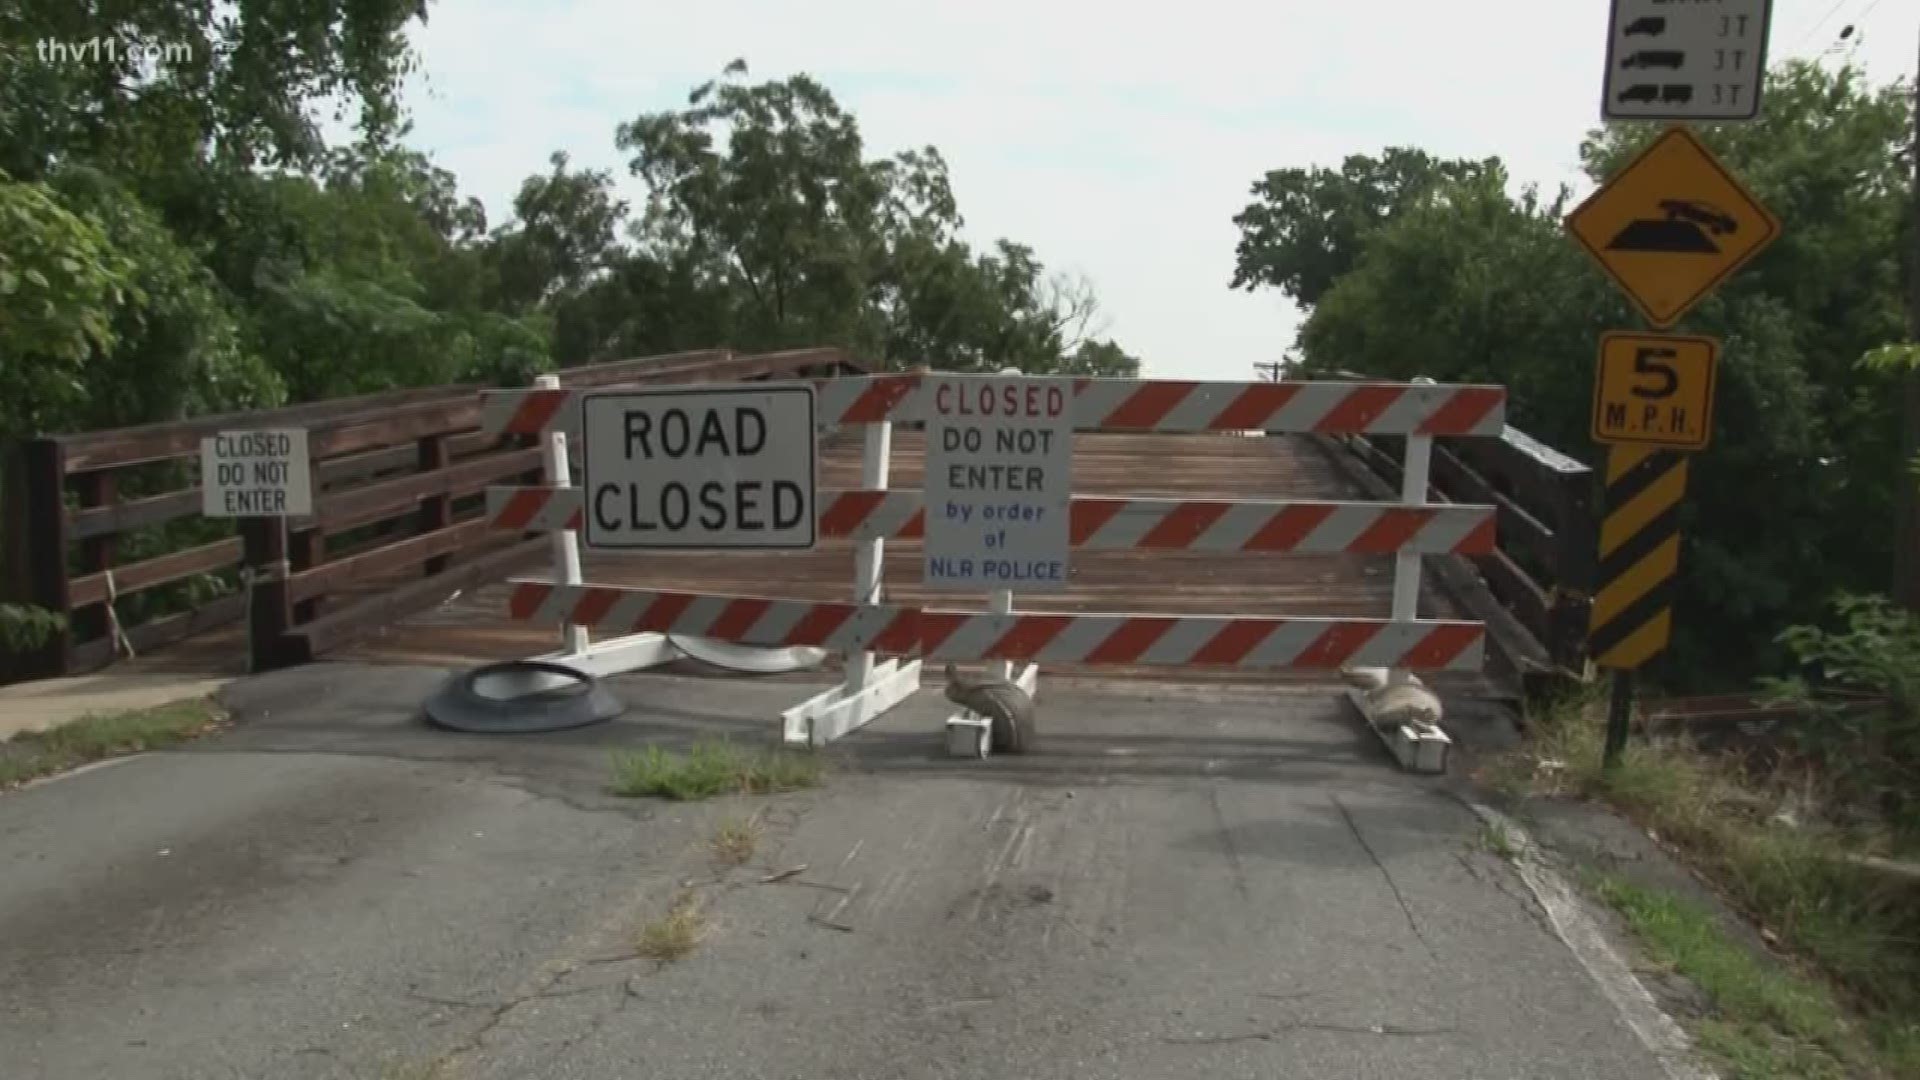 A wooden bridge off 14th Street in North Little Rock has been shut down for two years now because its unique structure is considered dangerous.